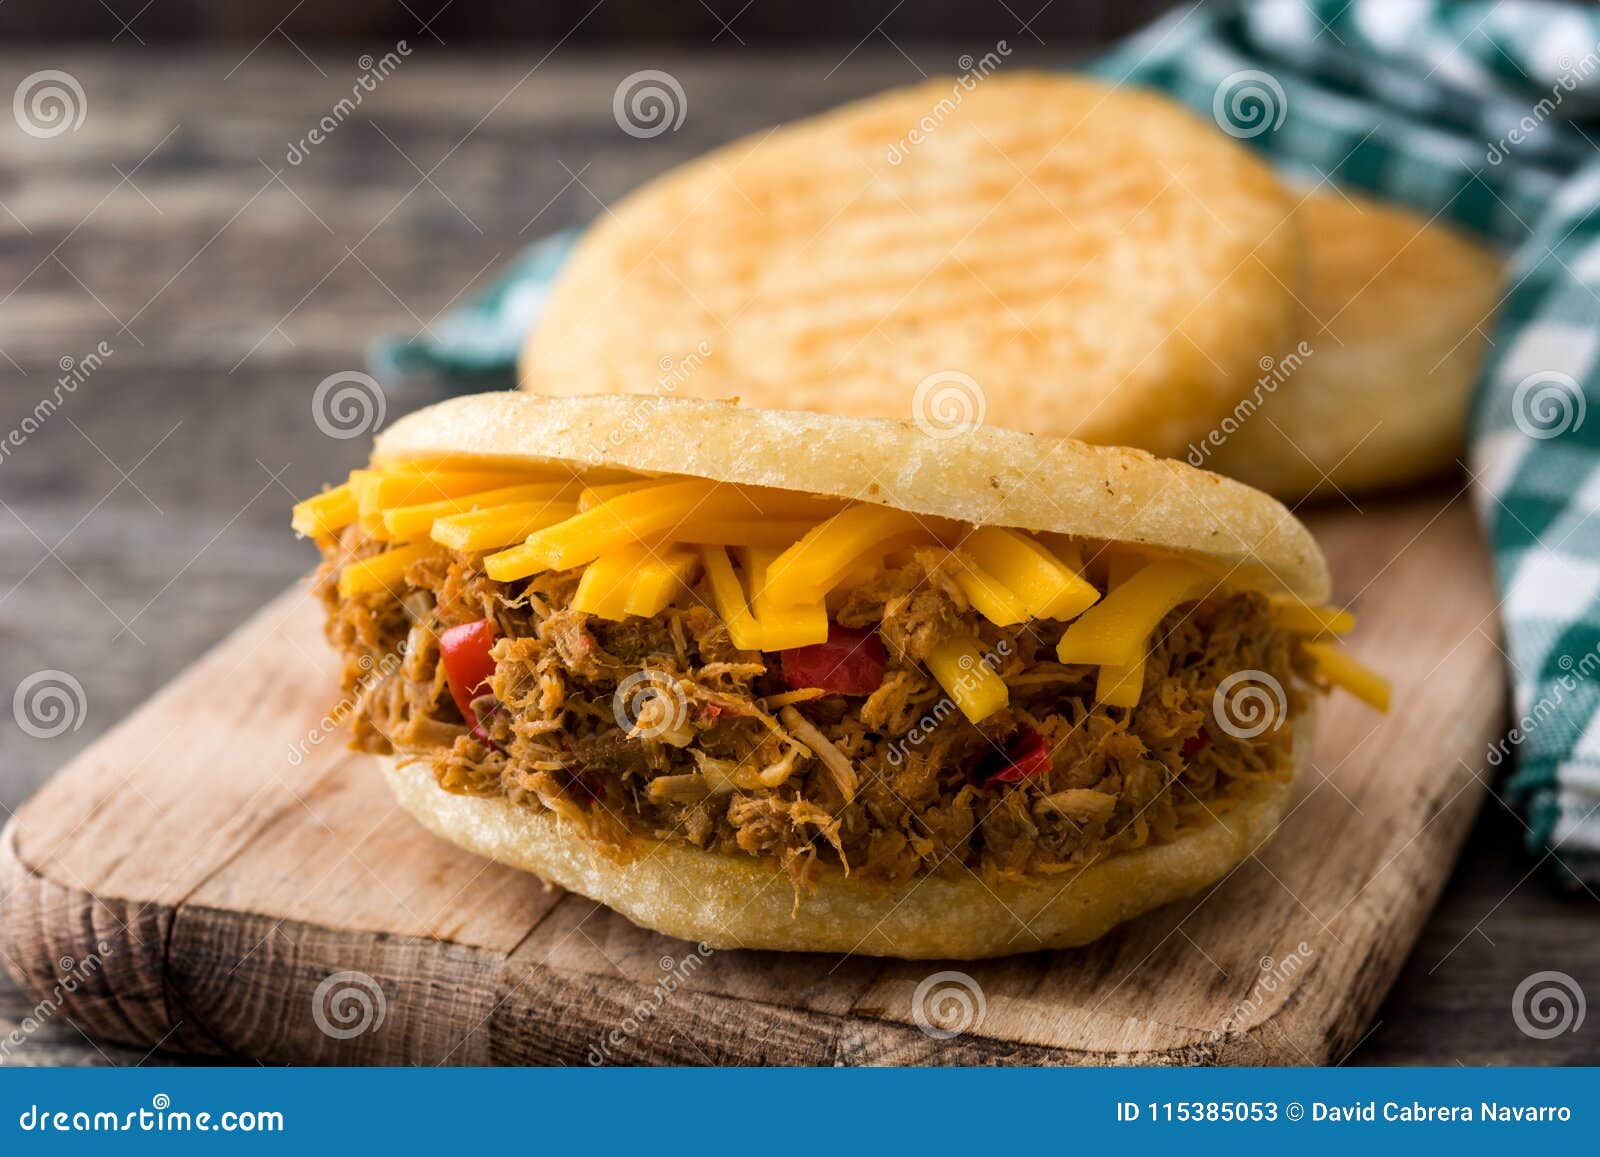 arepa with shredded beef and cheese on wooden background. venezuelan typical food